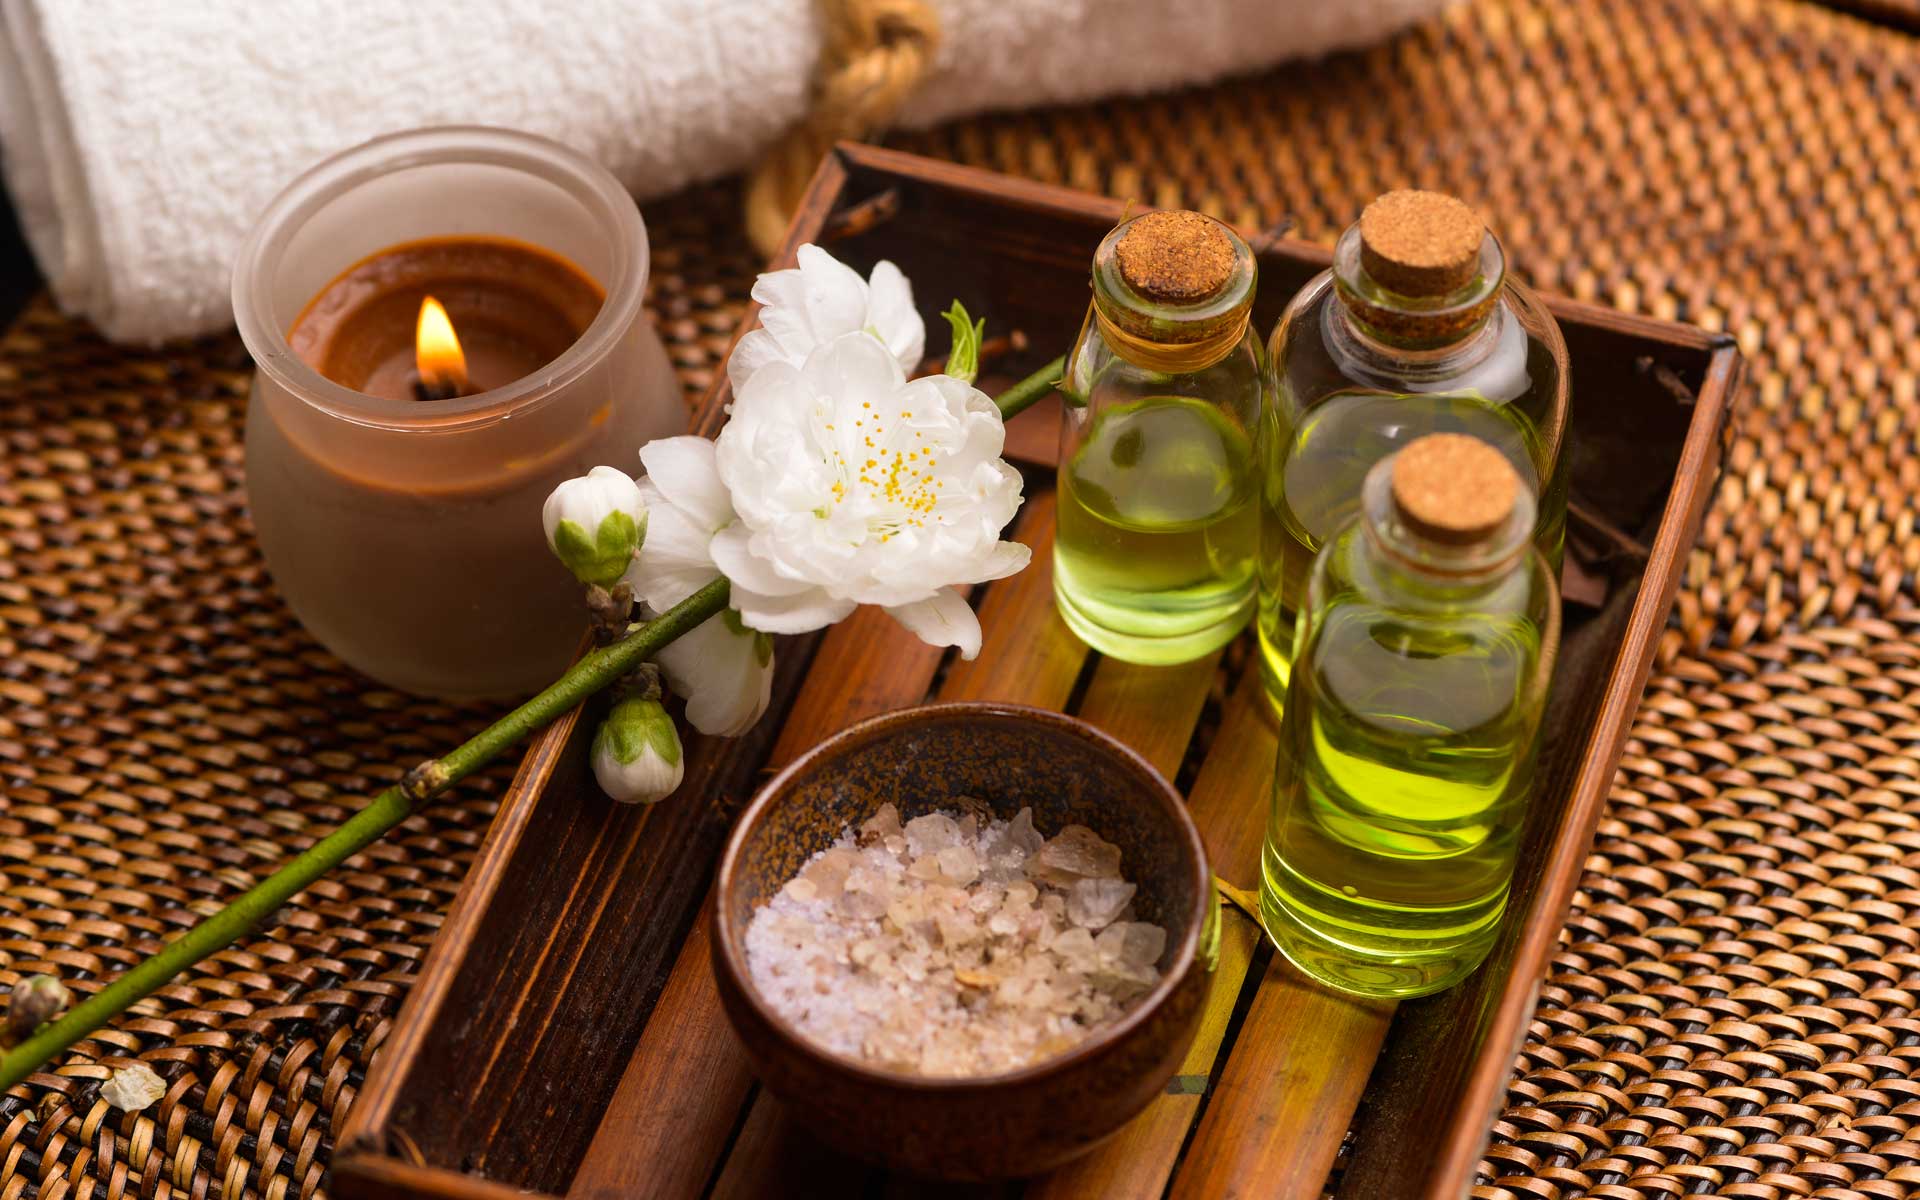 Spa tray and lit candle with rolled towel, salt bowl, and oil jars